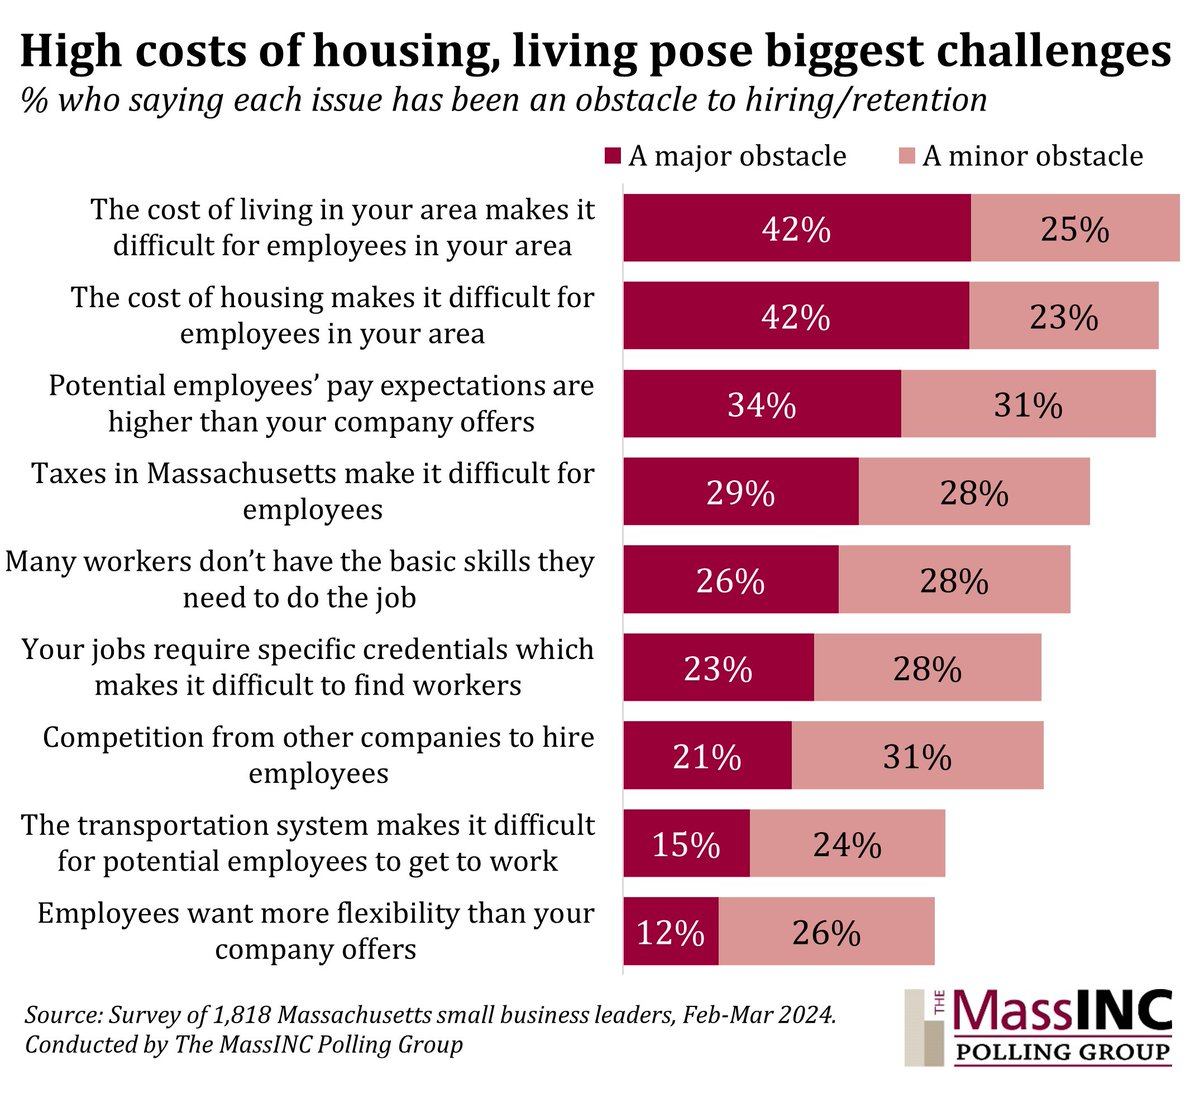 NEW MASS. SMALL BIZ SURVEY: Cost of housing, living pose biggest challenges for small businesses looking to hire / retain employees in Massachusetts. Most are looking to hire and just 15% say filling positions is easy in Mass. massincpolling.com/the-topline/sm…